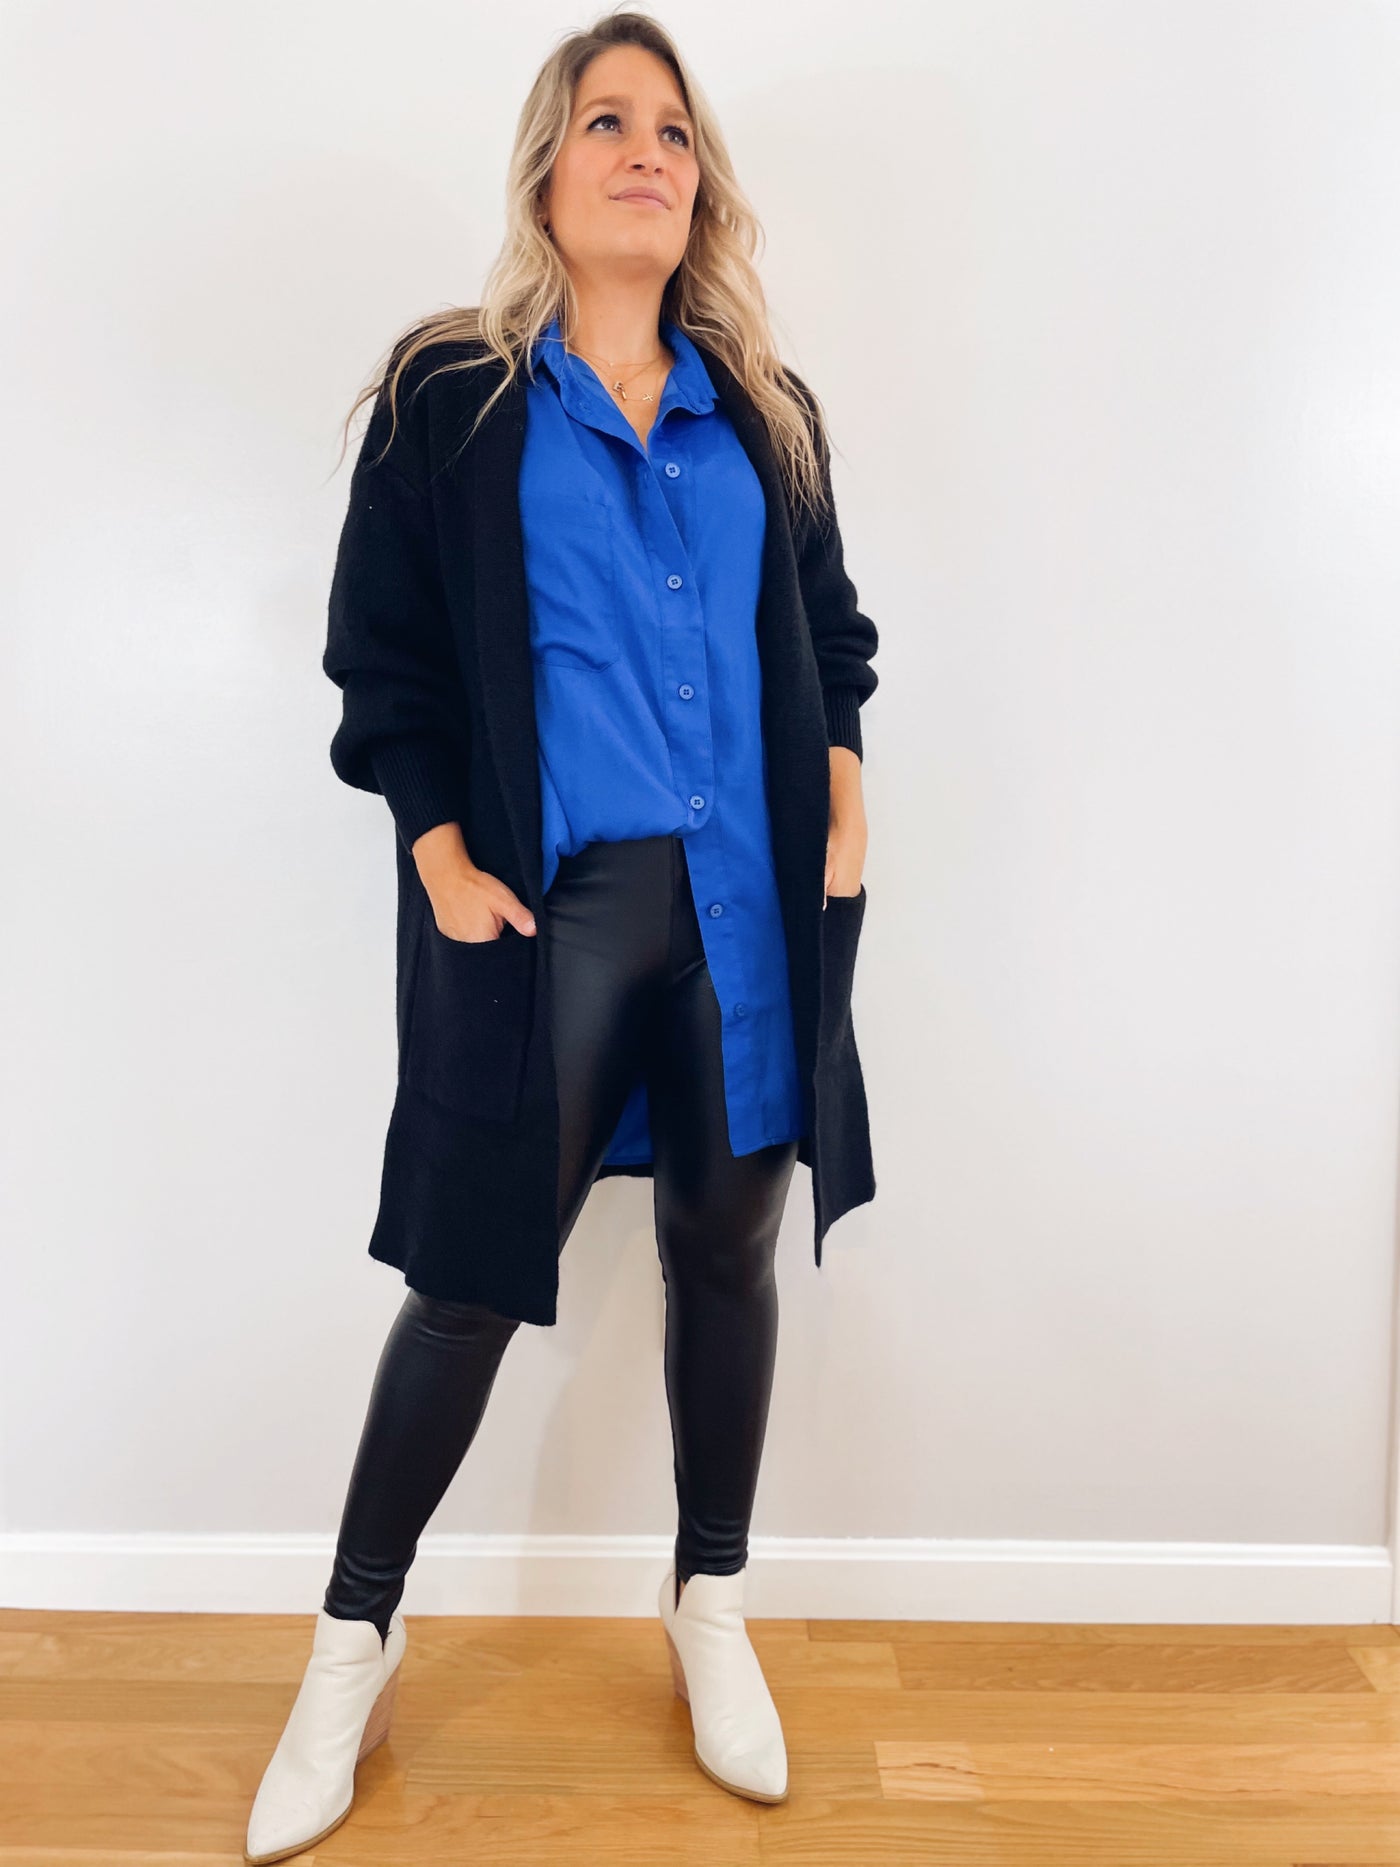 Bold Moves Cobalt Blue Button Down Tunic Top